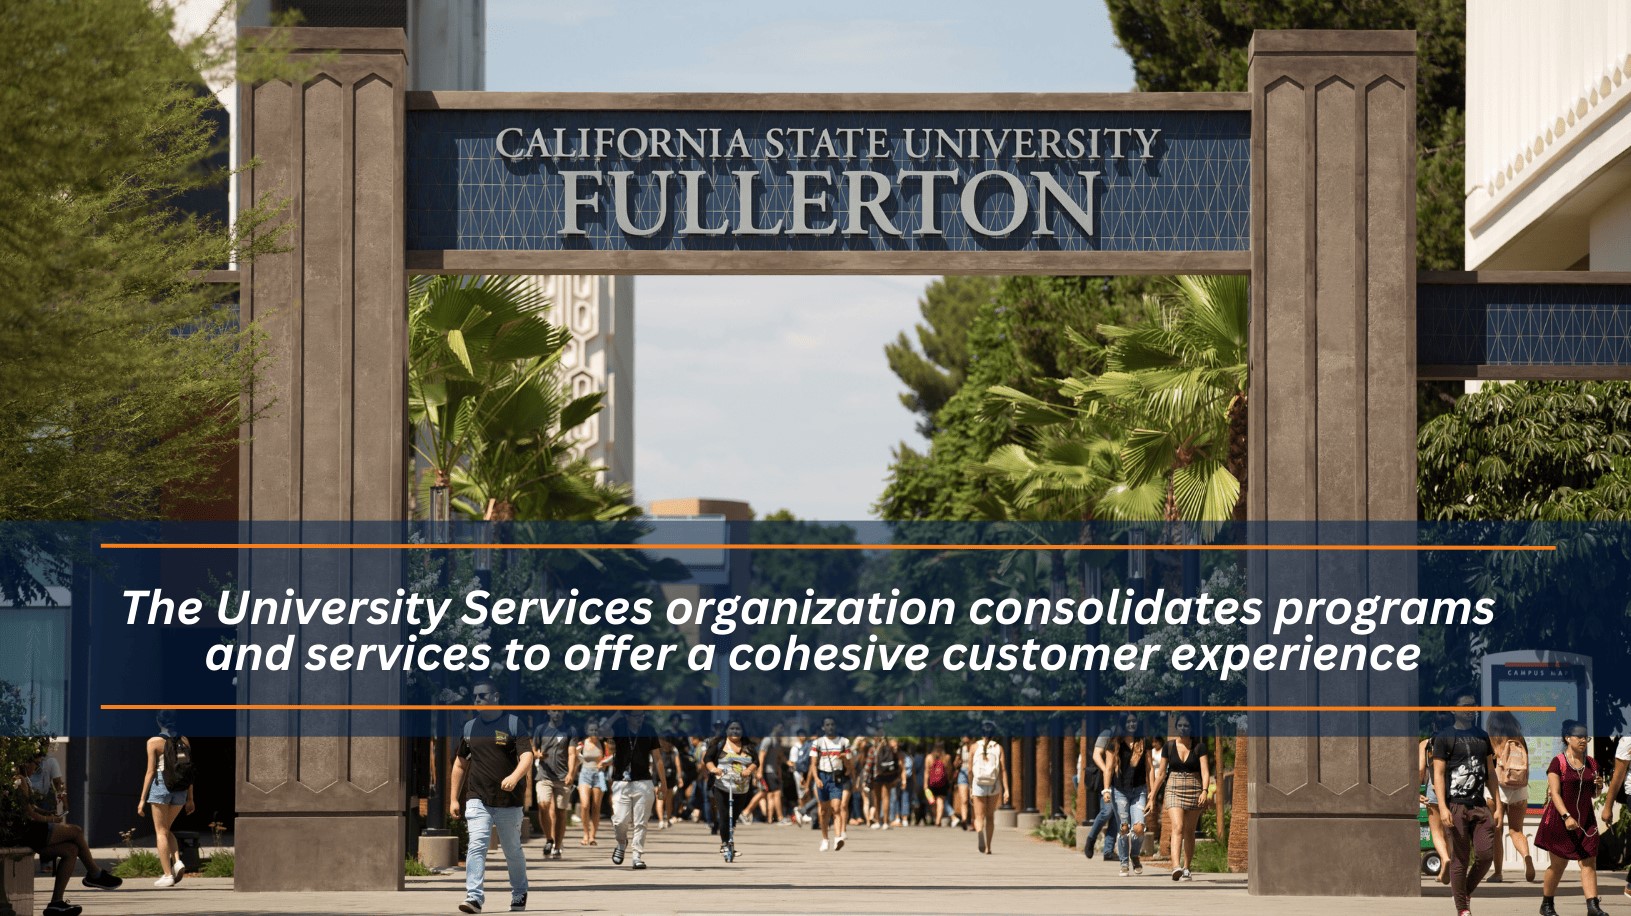 The University Services organization consolidates programs and services to offer a cohesive customer experience.